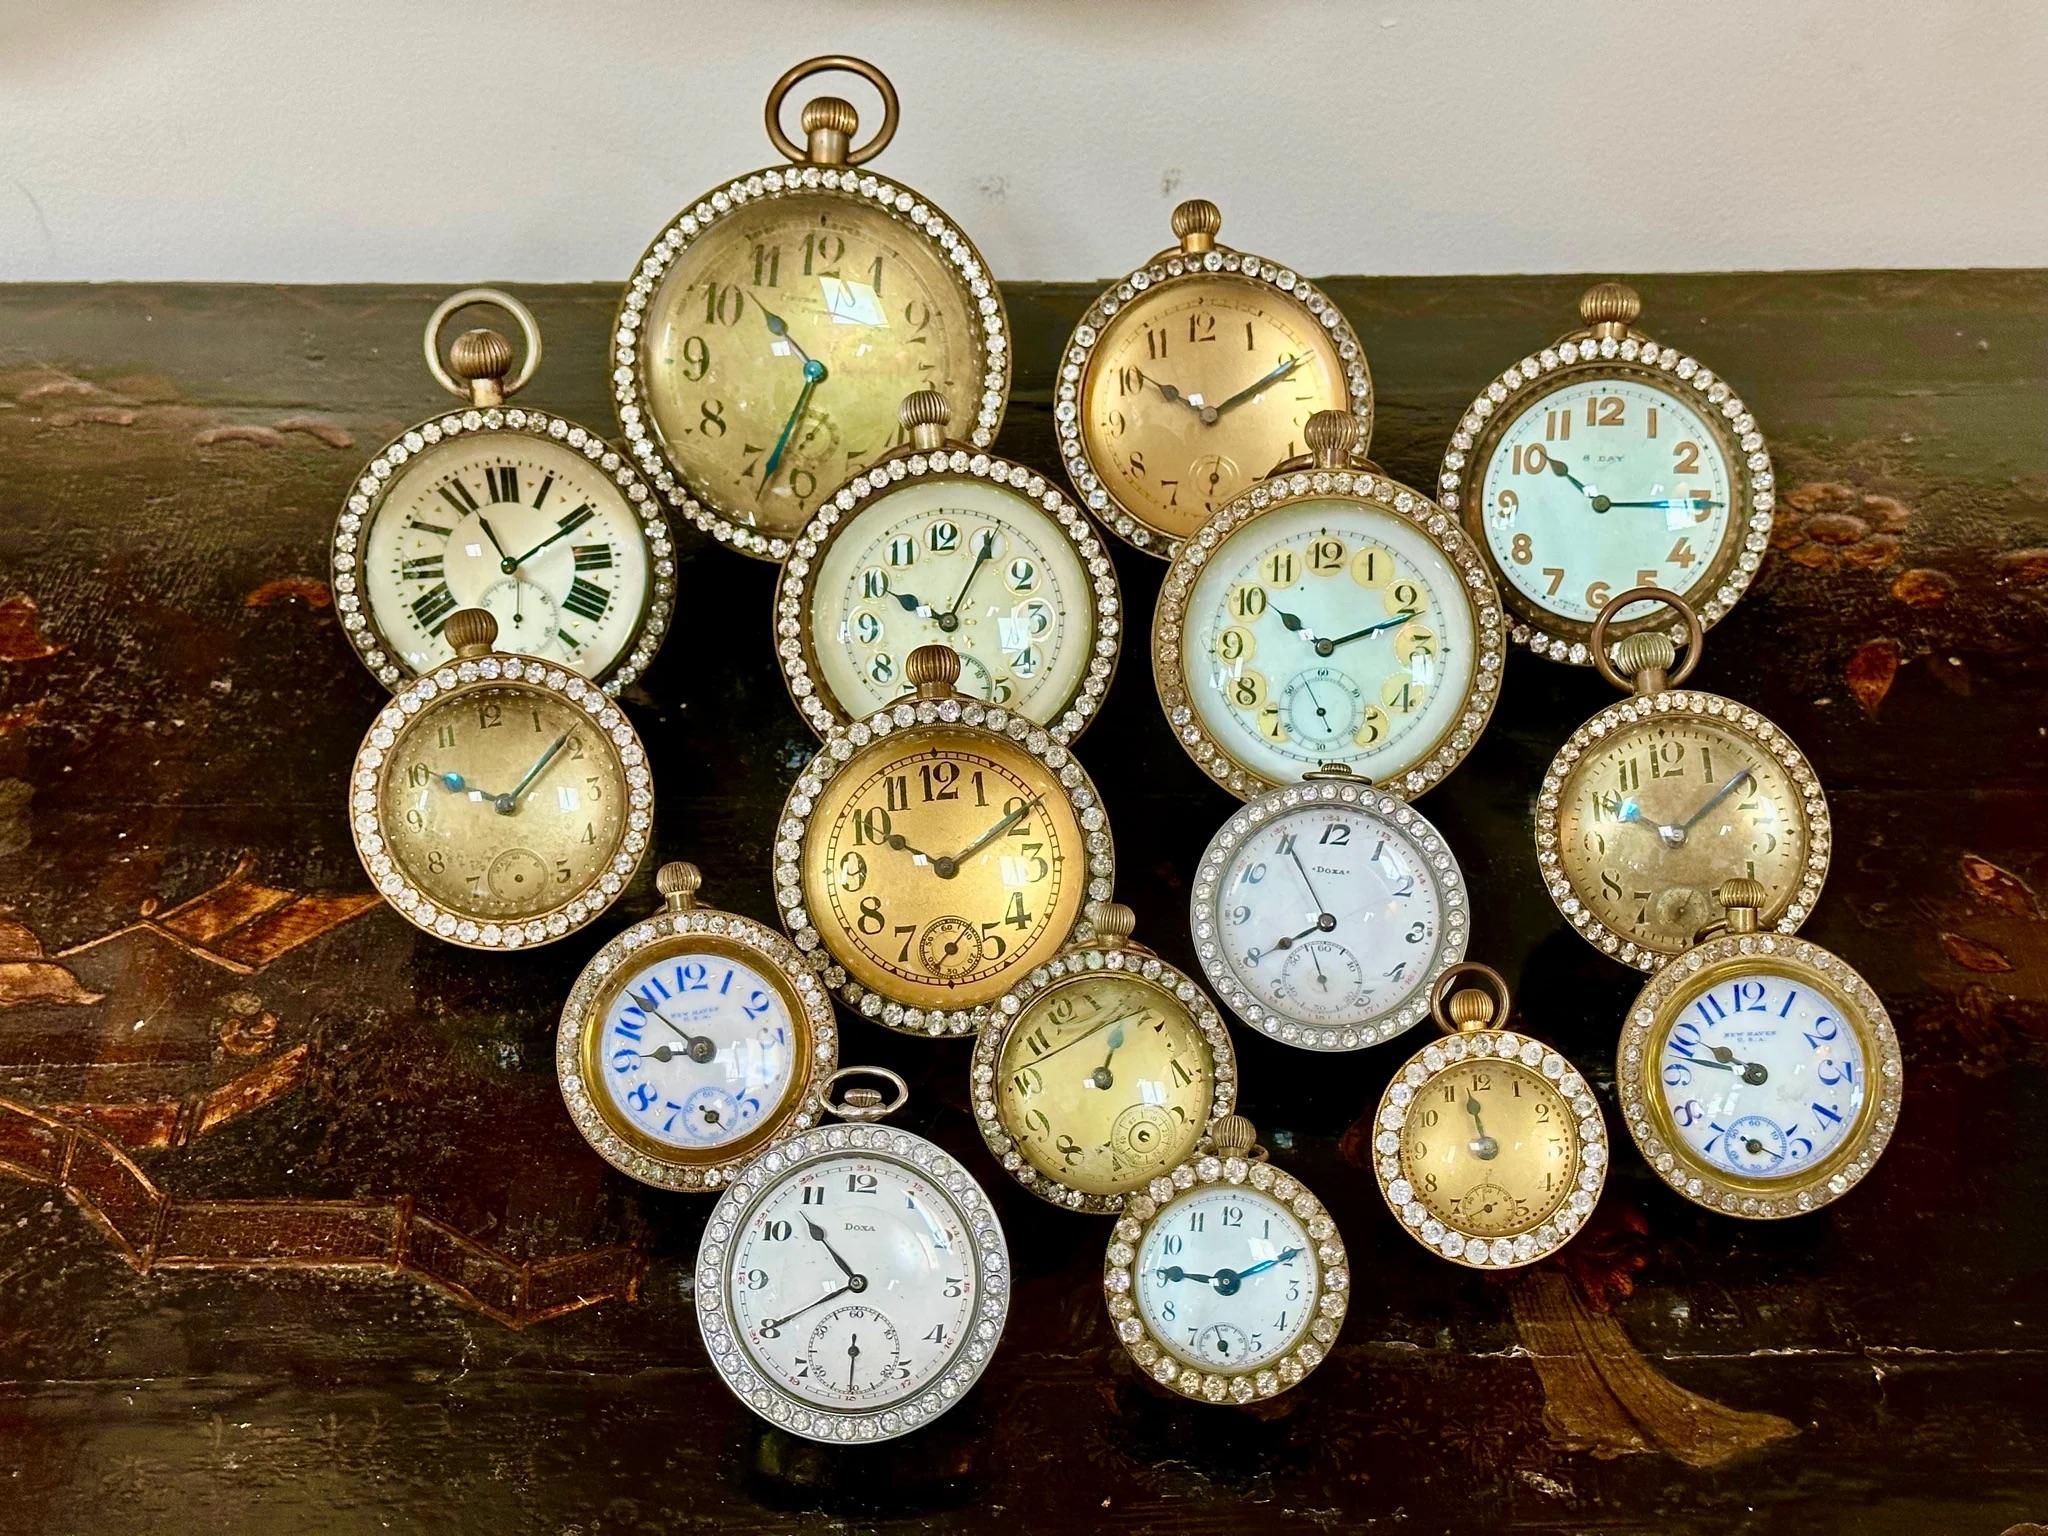 Sixteen ball clocks, all but two having cases of brass and paste diamond, crystal, “jewel” surrounds.  Of varying sizes, styles, and makers, most late 19th century to early 20th century.  One with a kickstand. Most made in France.  3” hi. to 7” h.